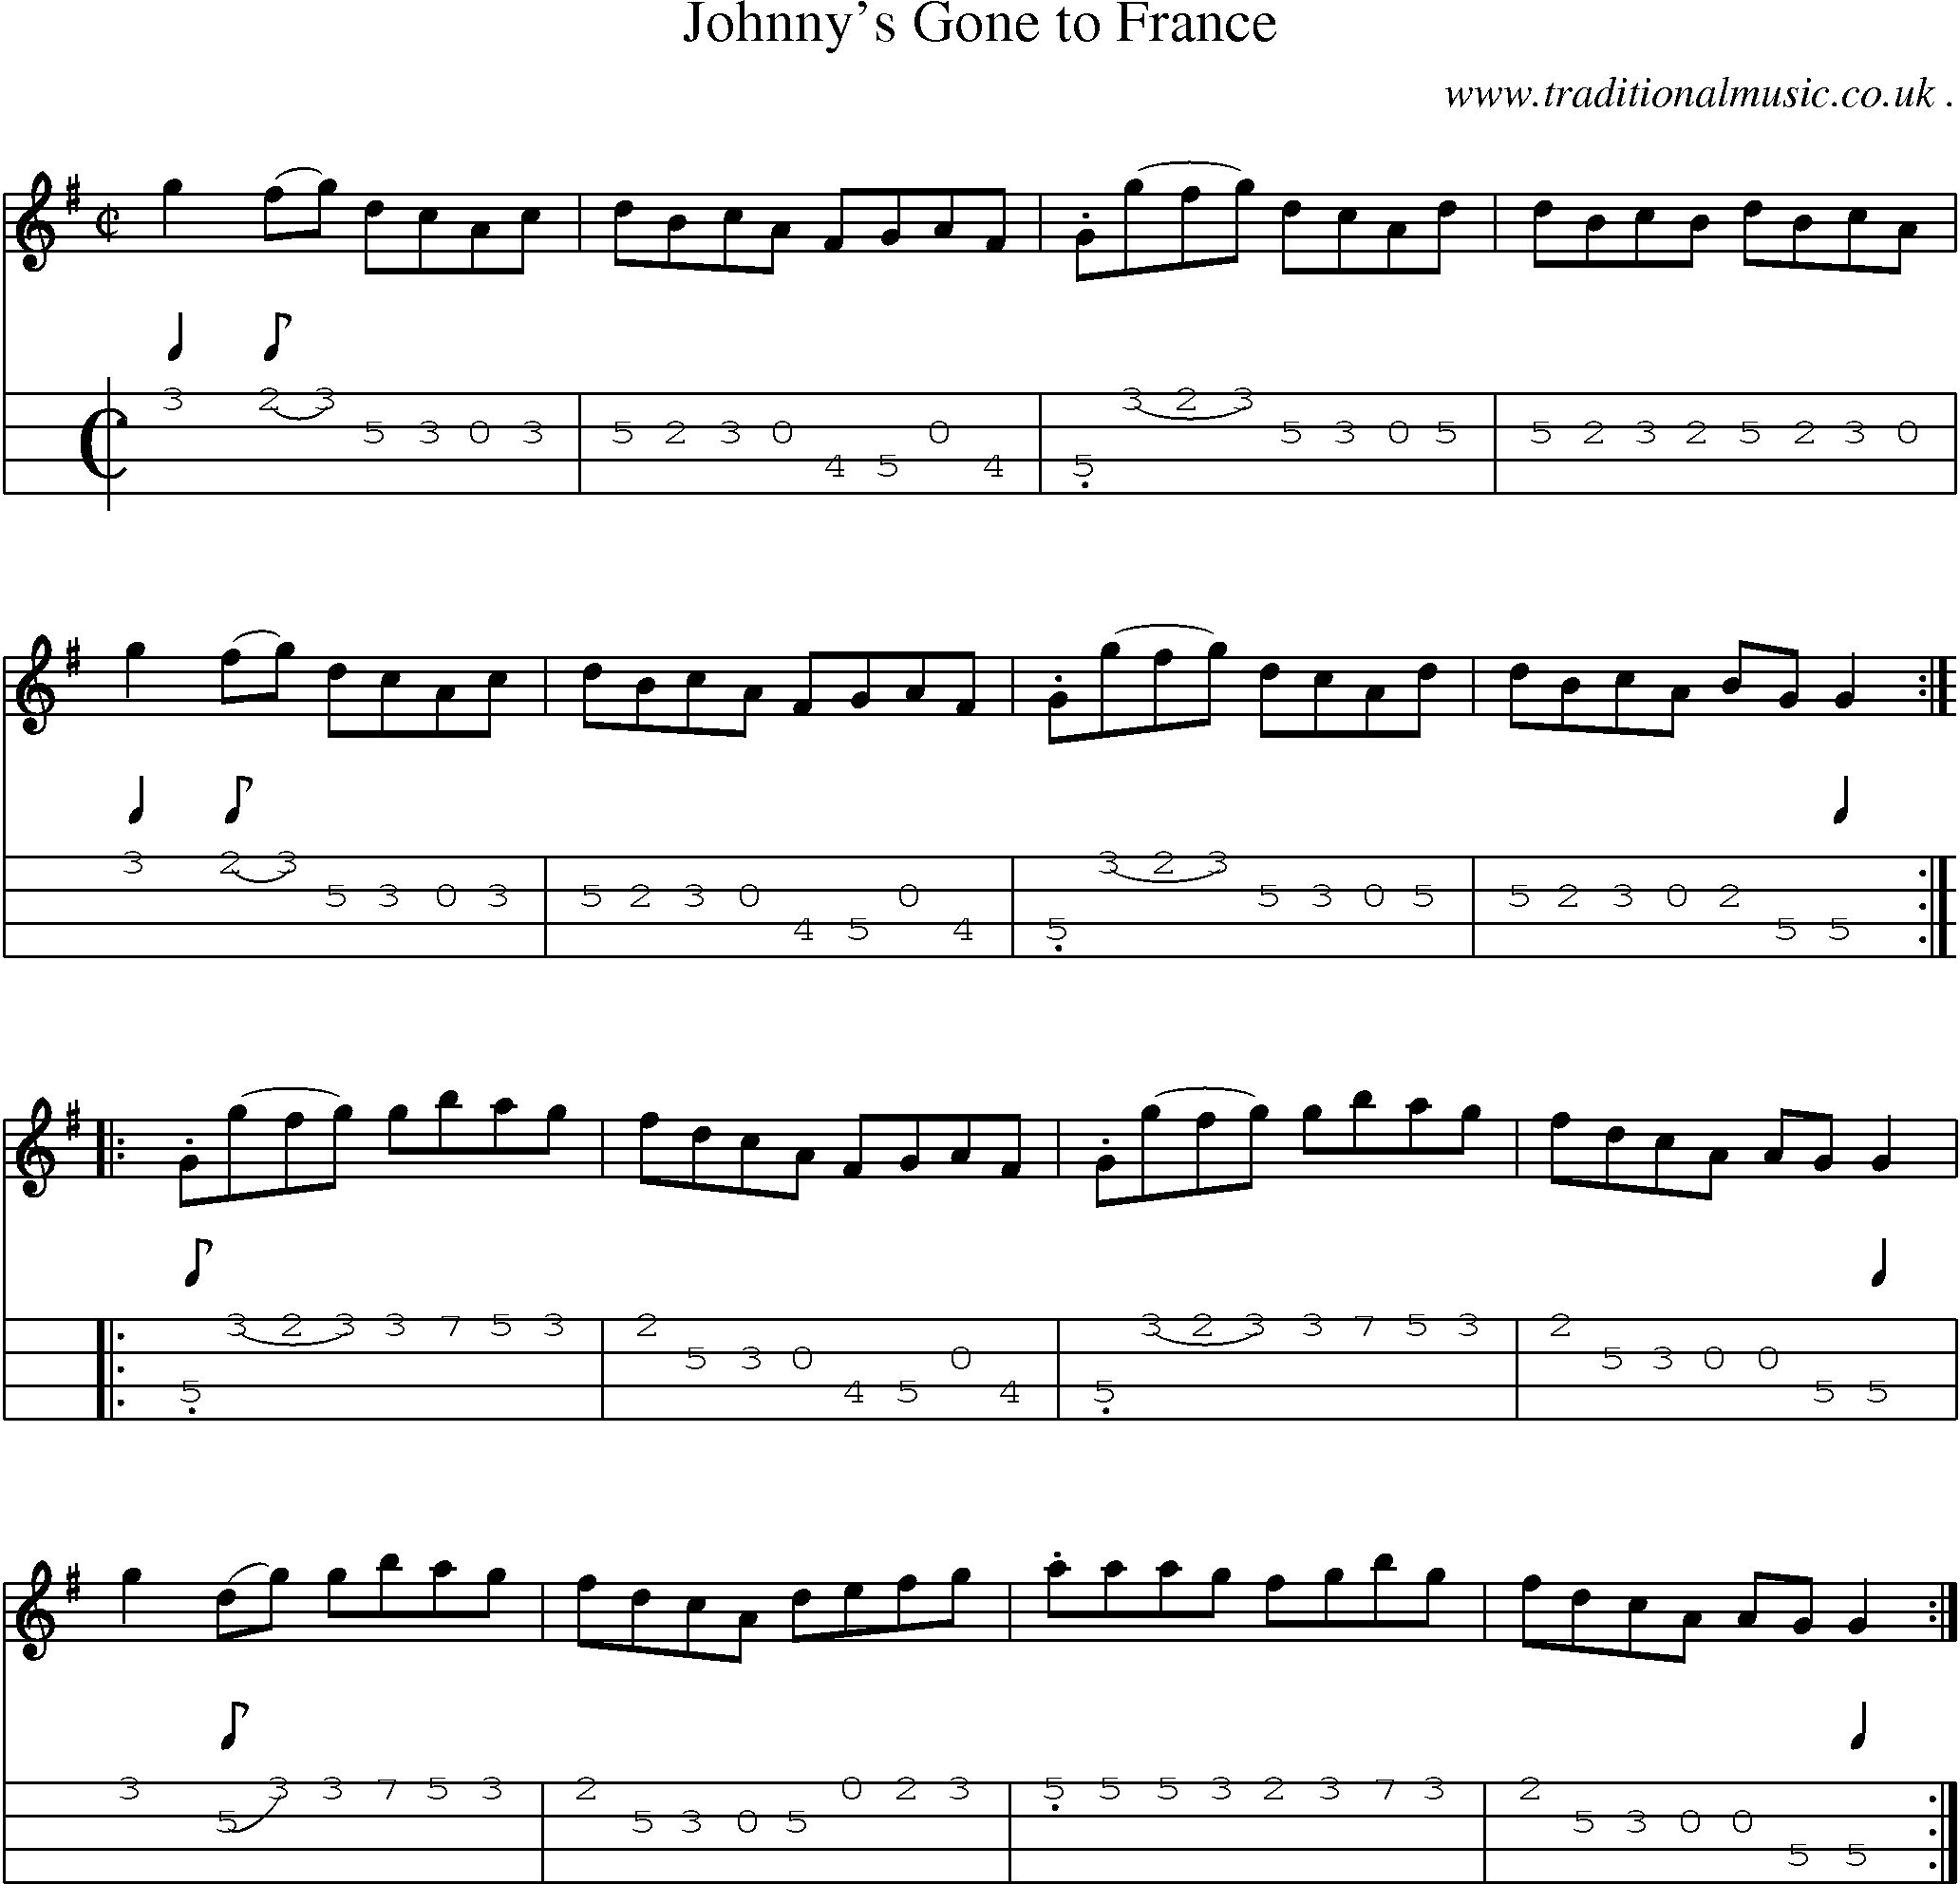 Sheet-Music and Mandolin Tabs for Johnnys Gone To France